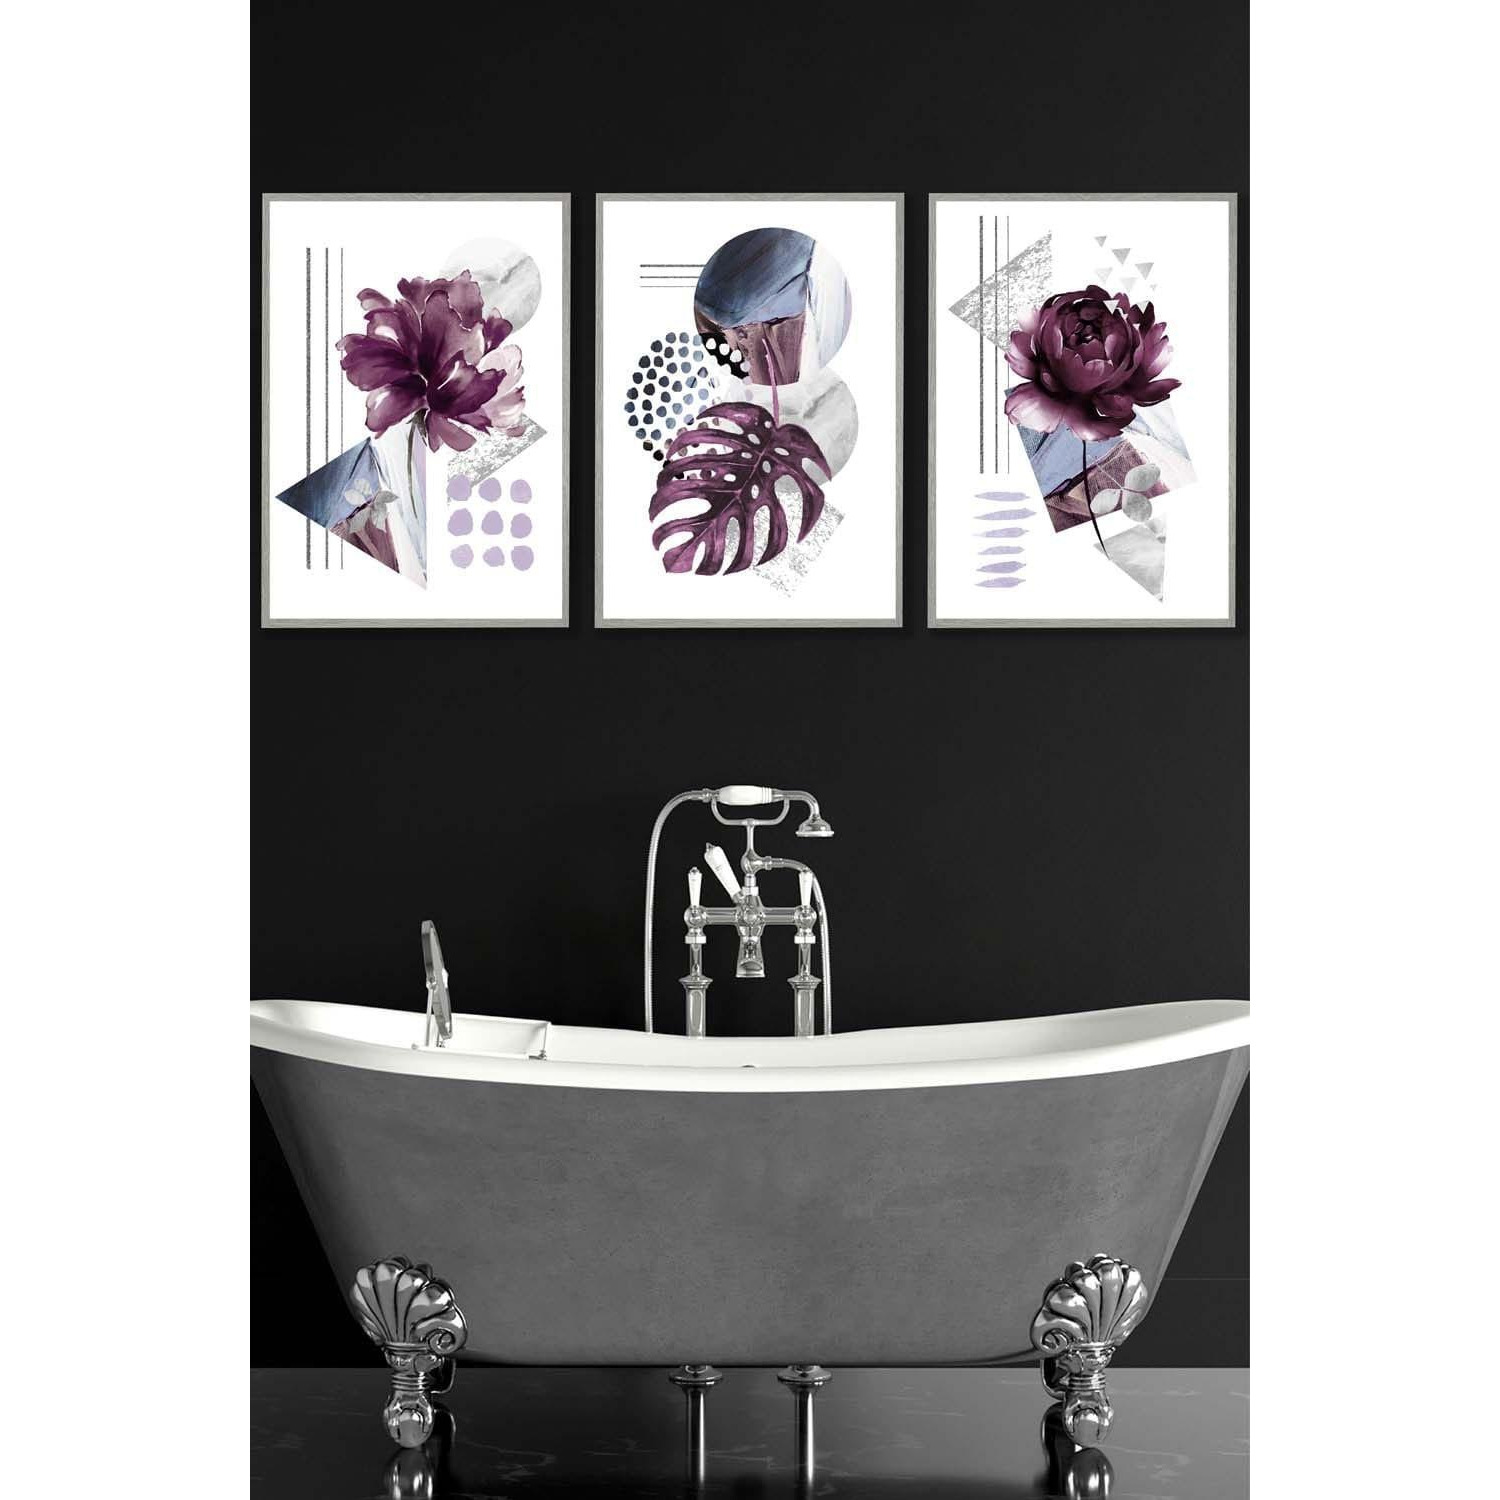 Set of 3 Light Grey Framed Abstract Purple and Silver Botanical Wall Art - image 1